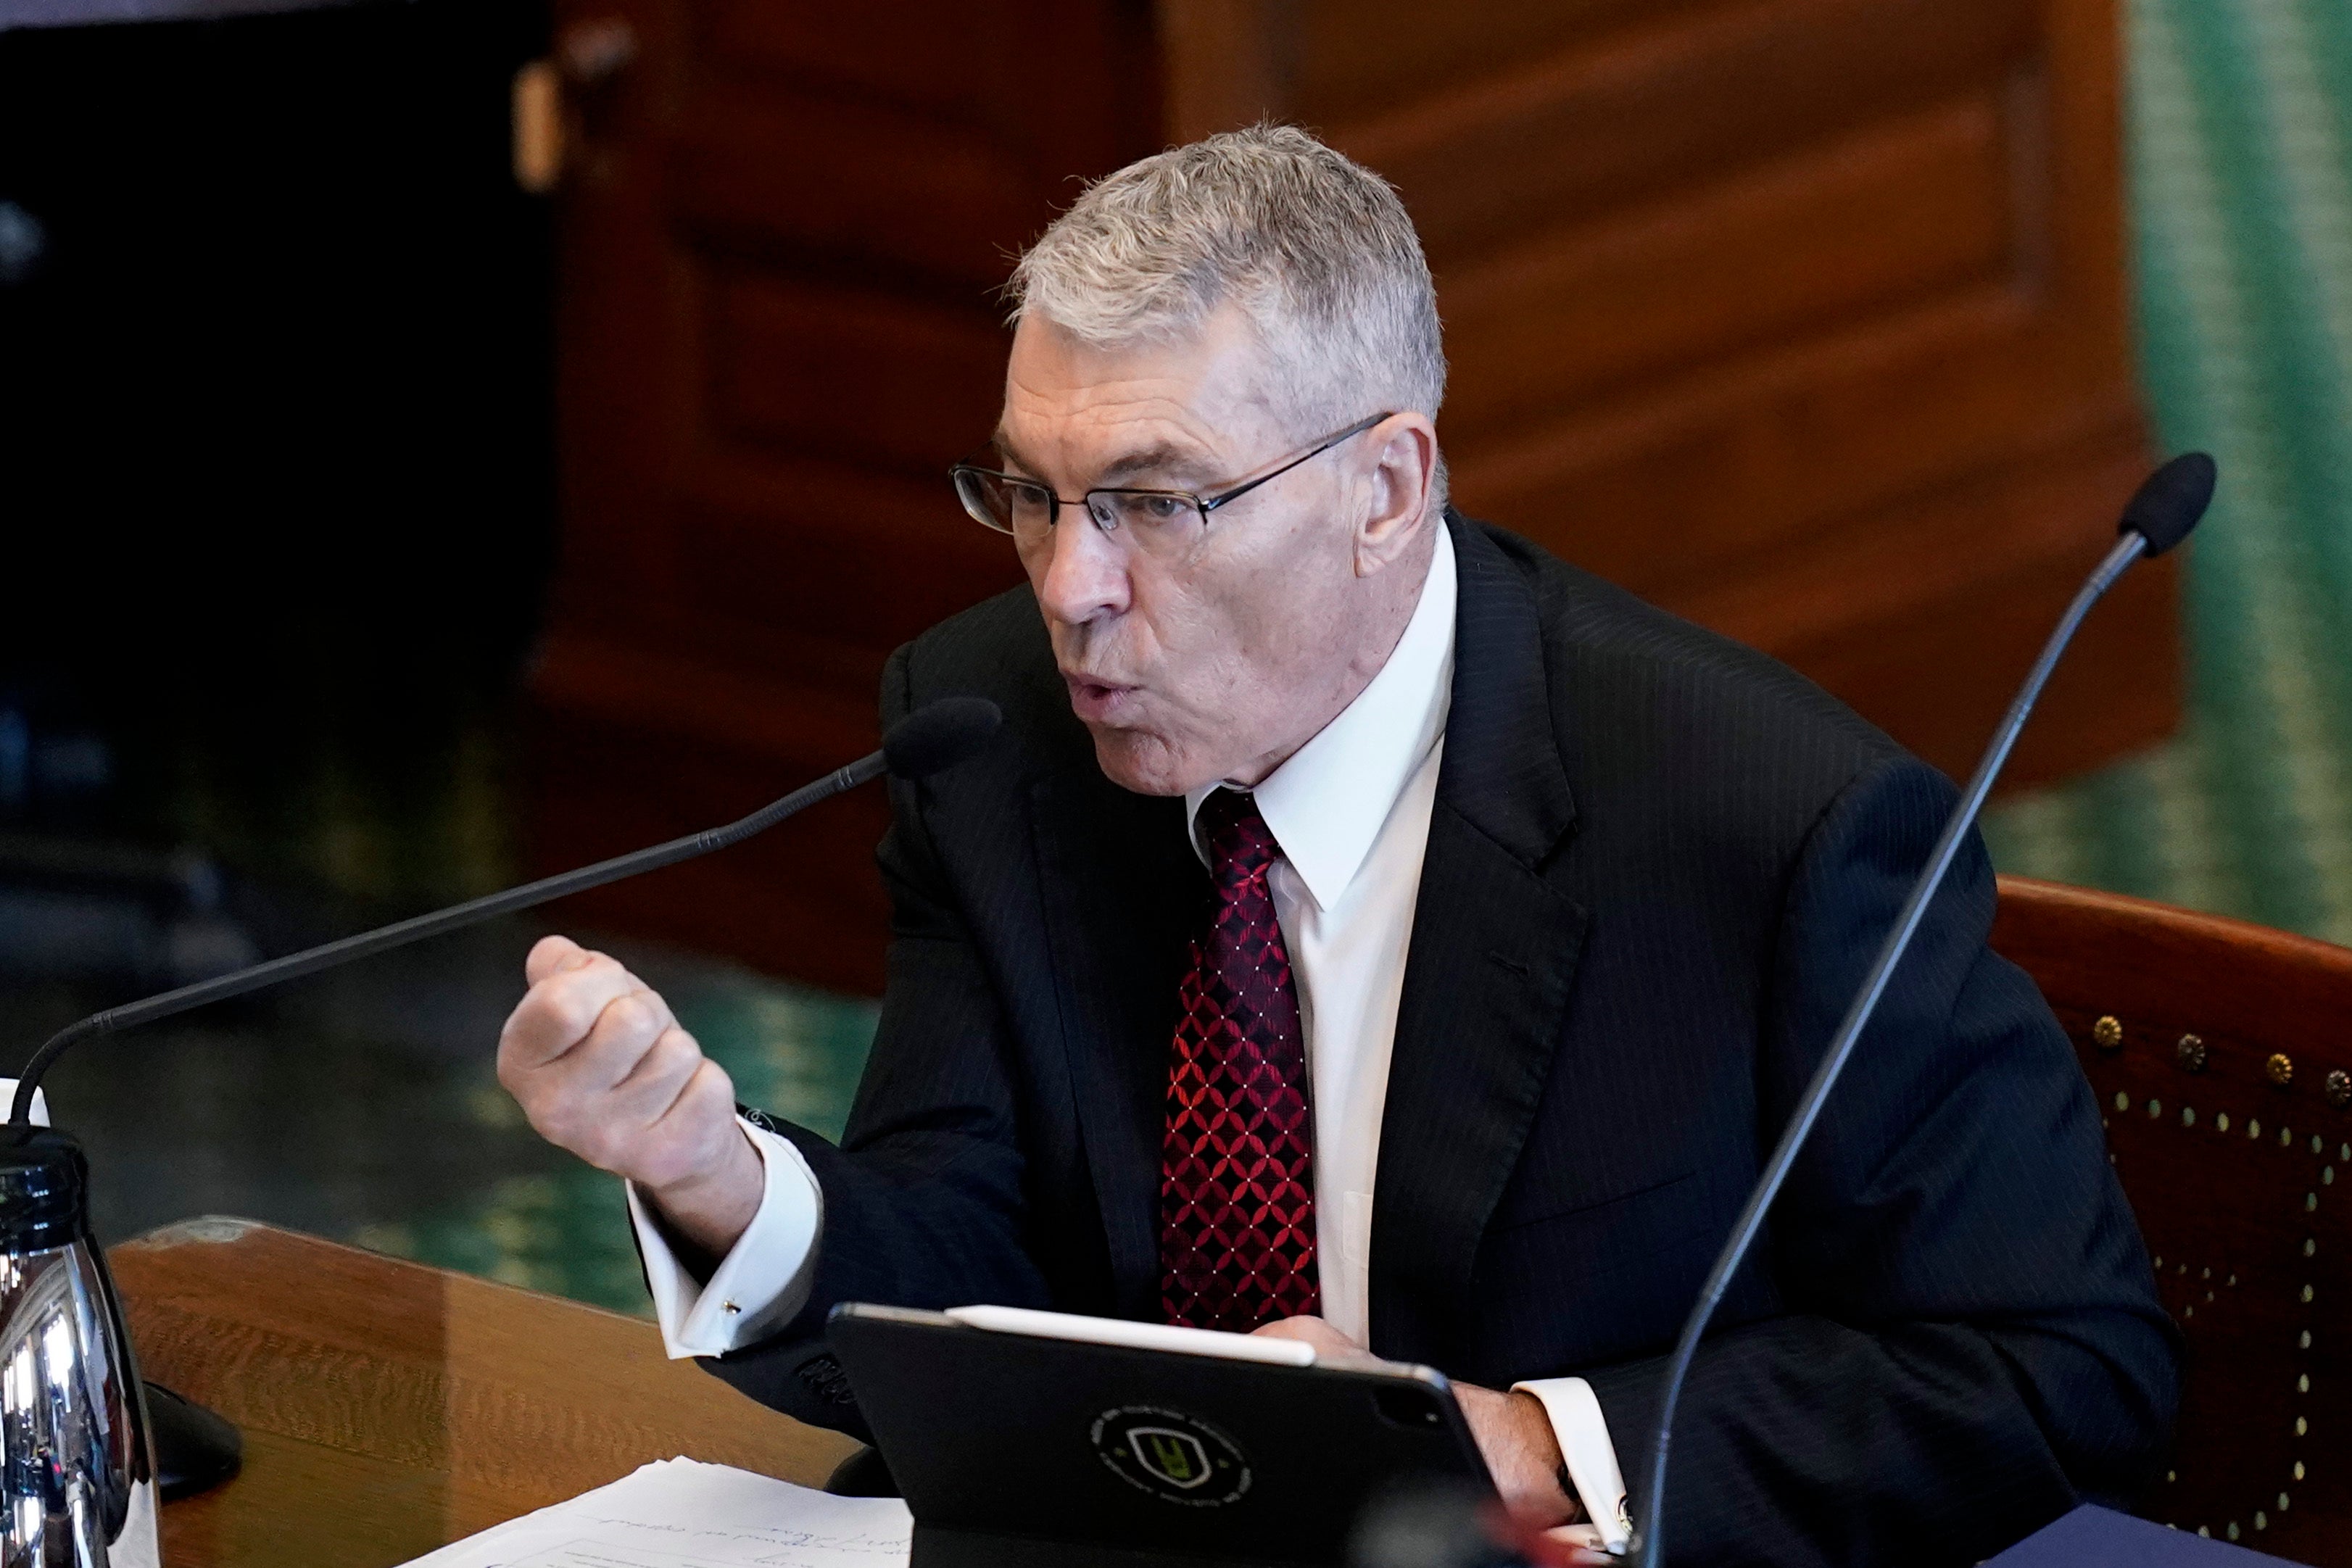 Texas Department of Public Safety Director Steve McCraw testifies at a Texas Senate hearing at the state capitol on 21 June 2022